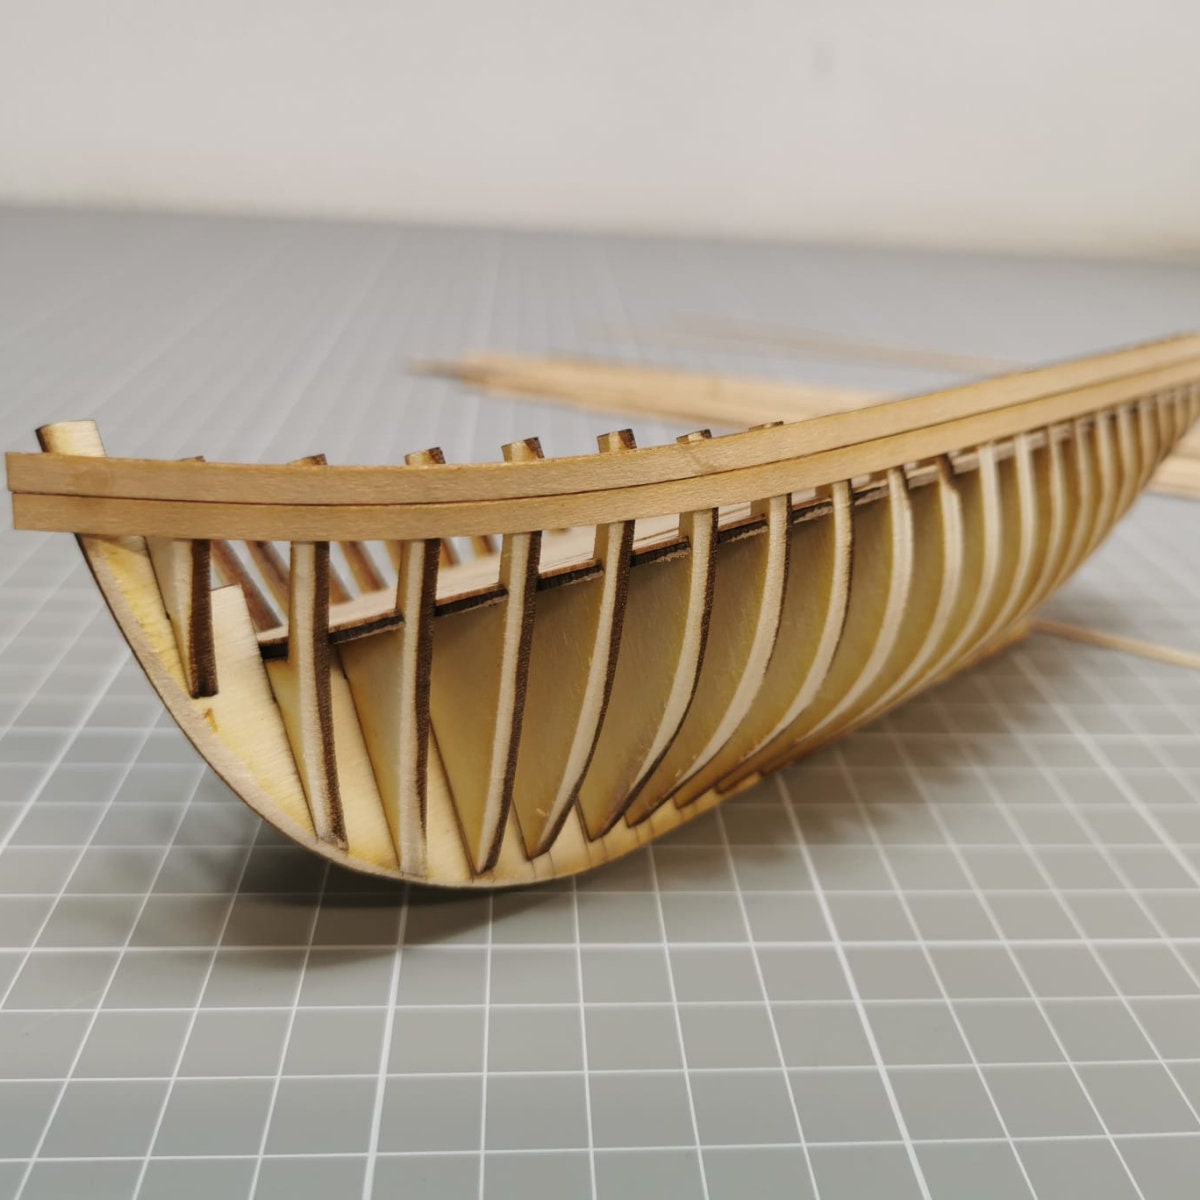 Fishing Boat 1:48 Made of Wood to Build Yourself Laser Cut Model